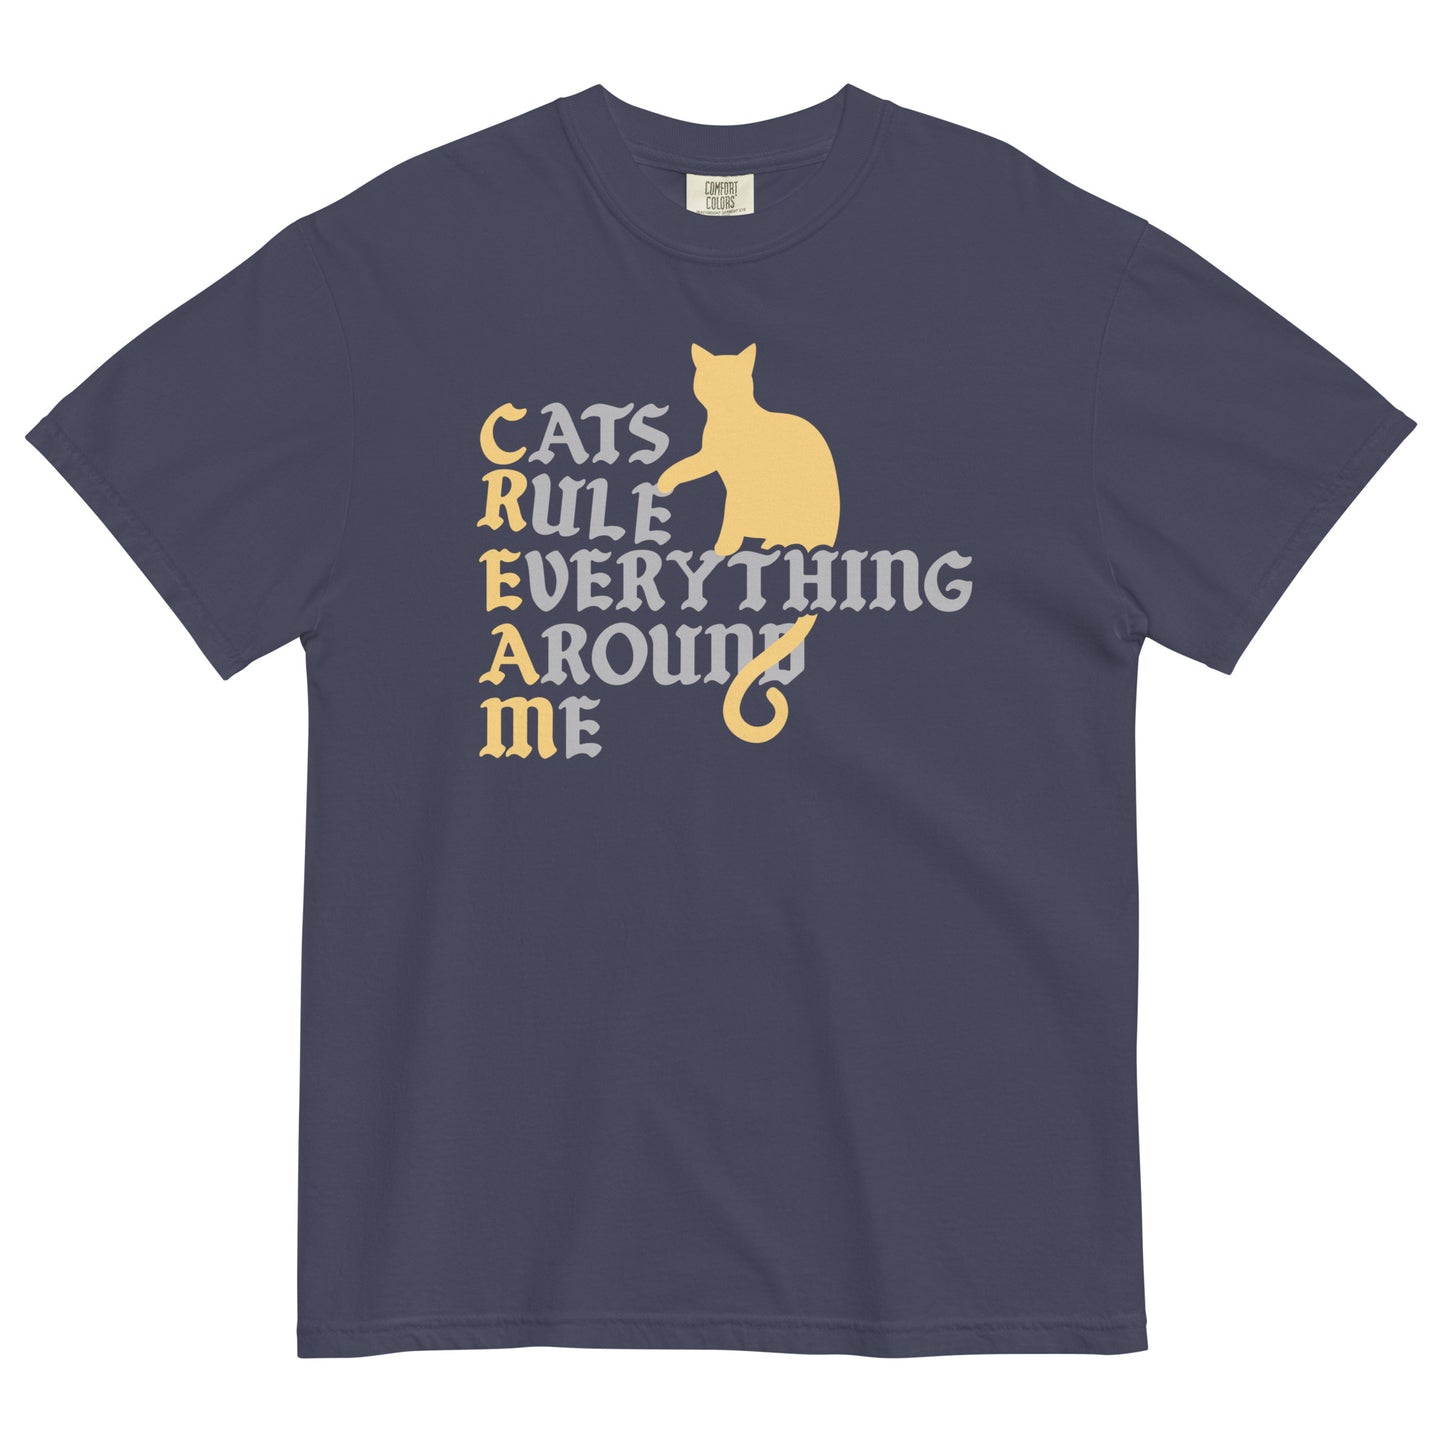 Cats Rule Everything Around Me Men's Relaxed Fit Tee